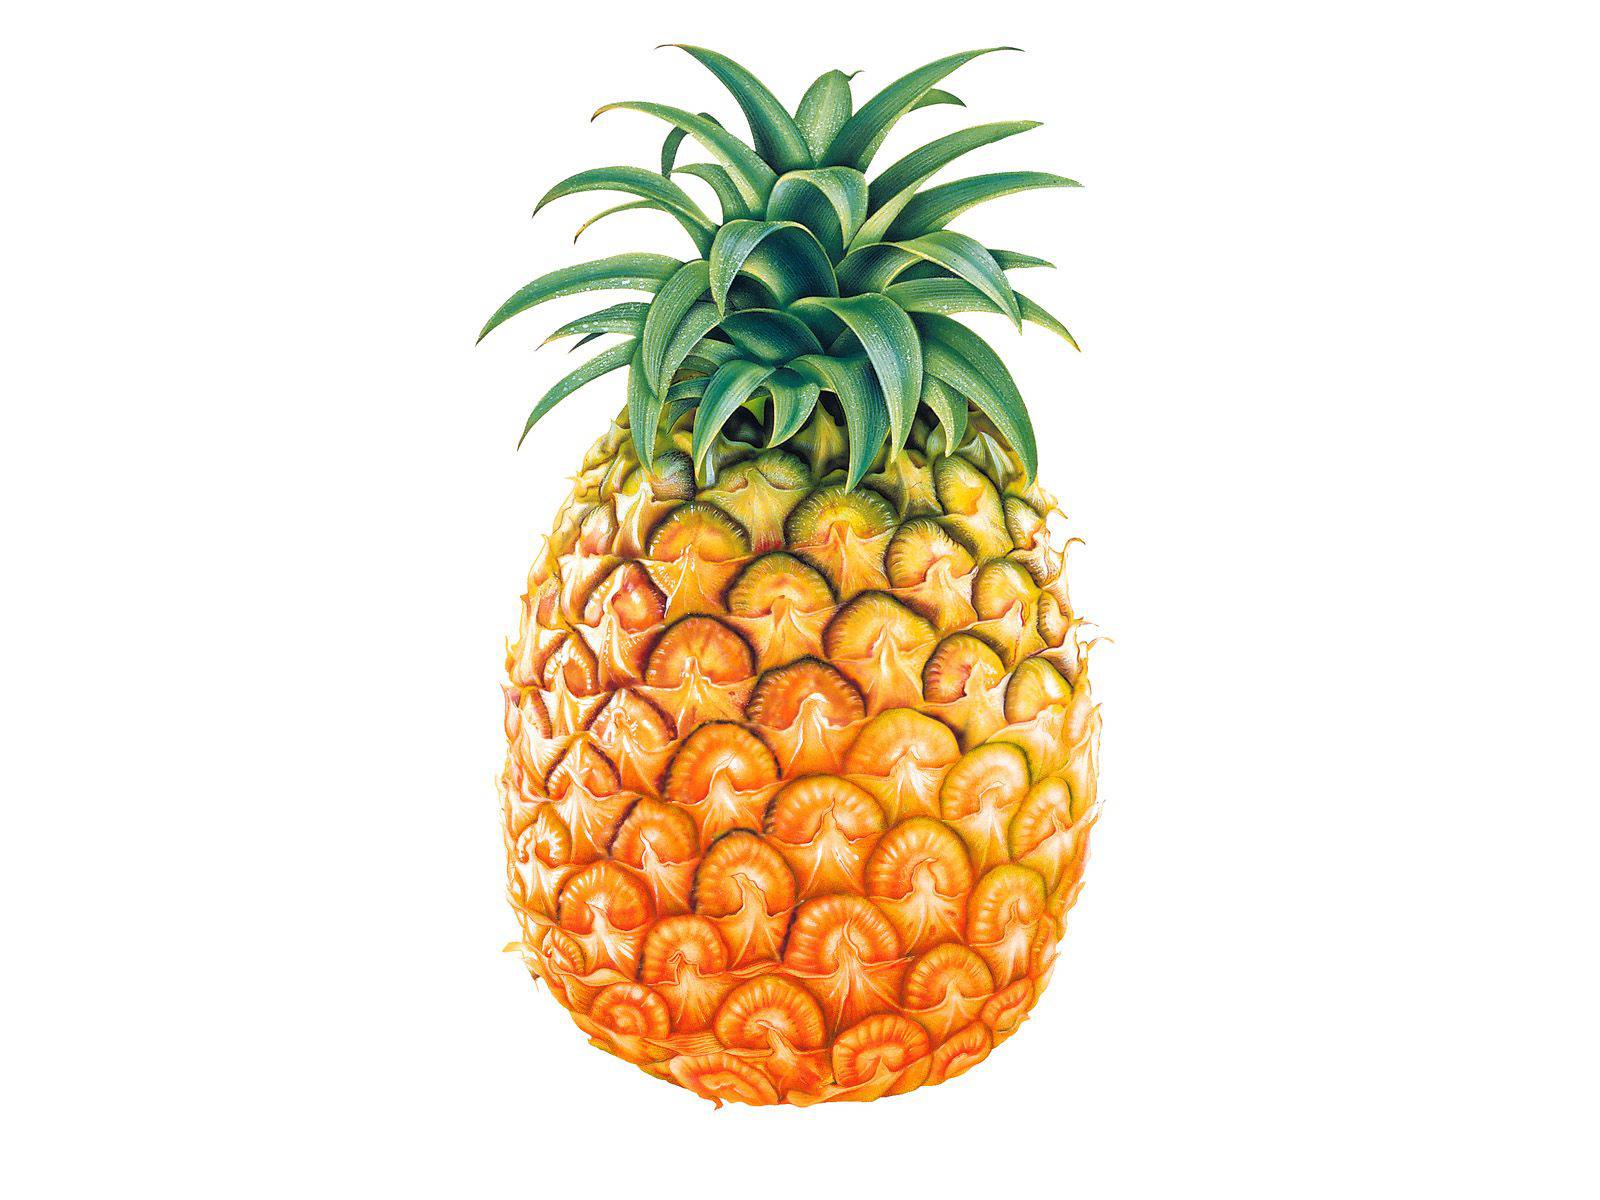 clipart of pineapple - photo #40